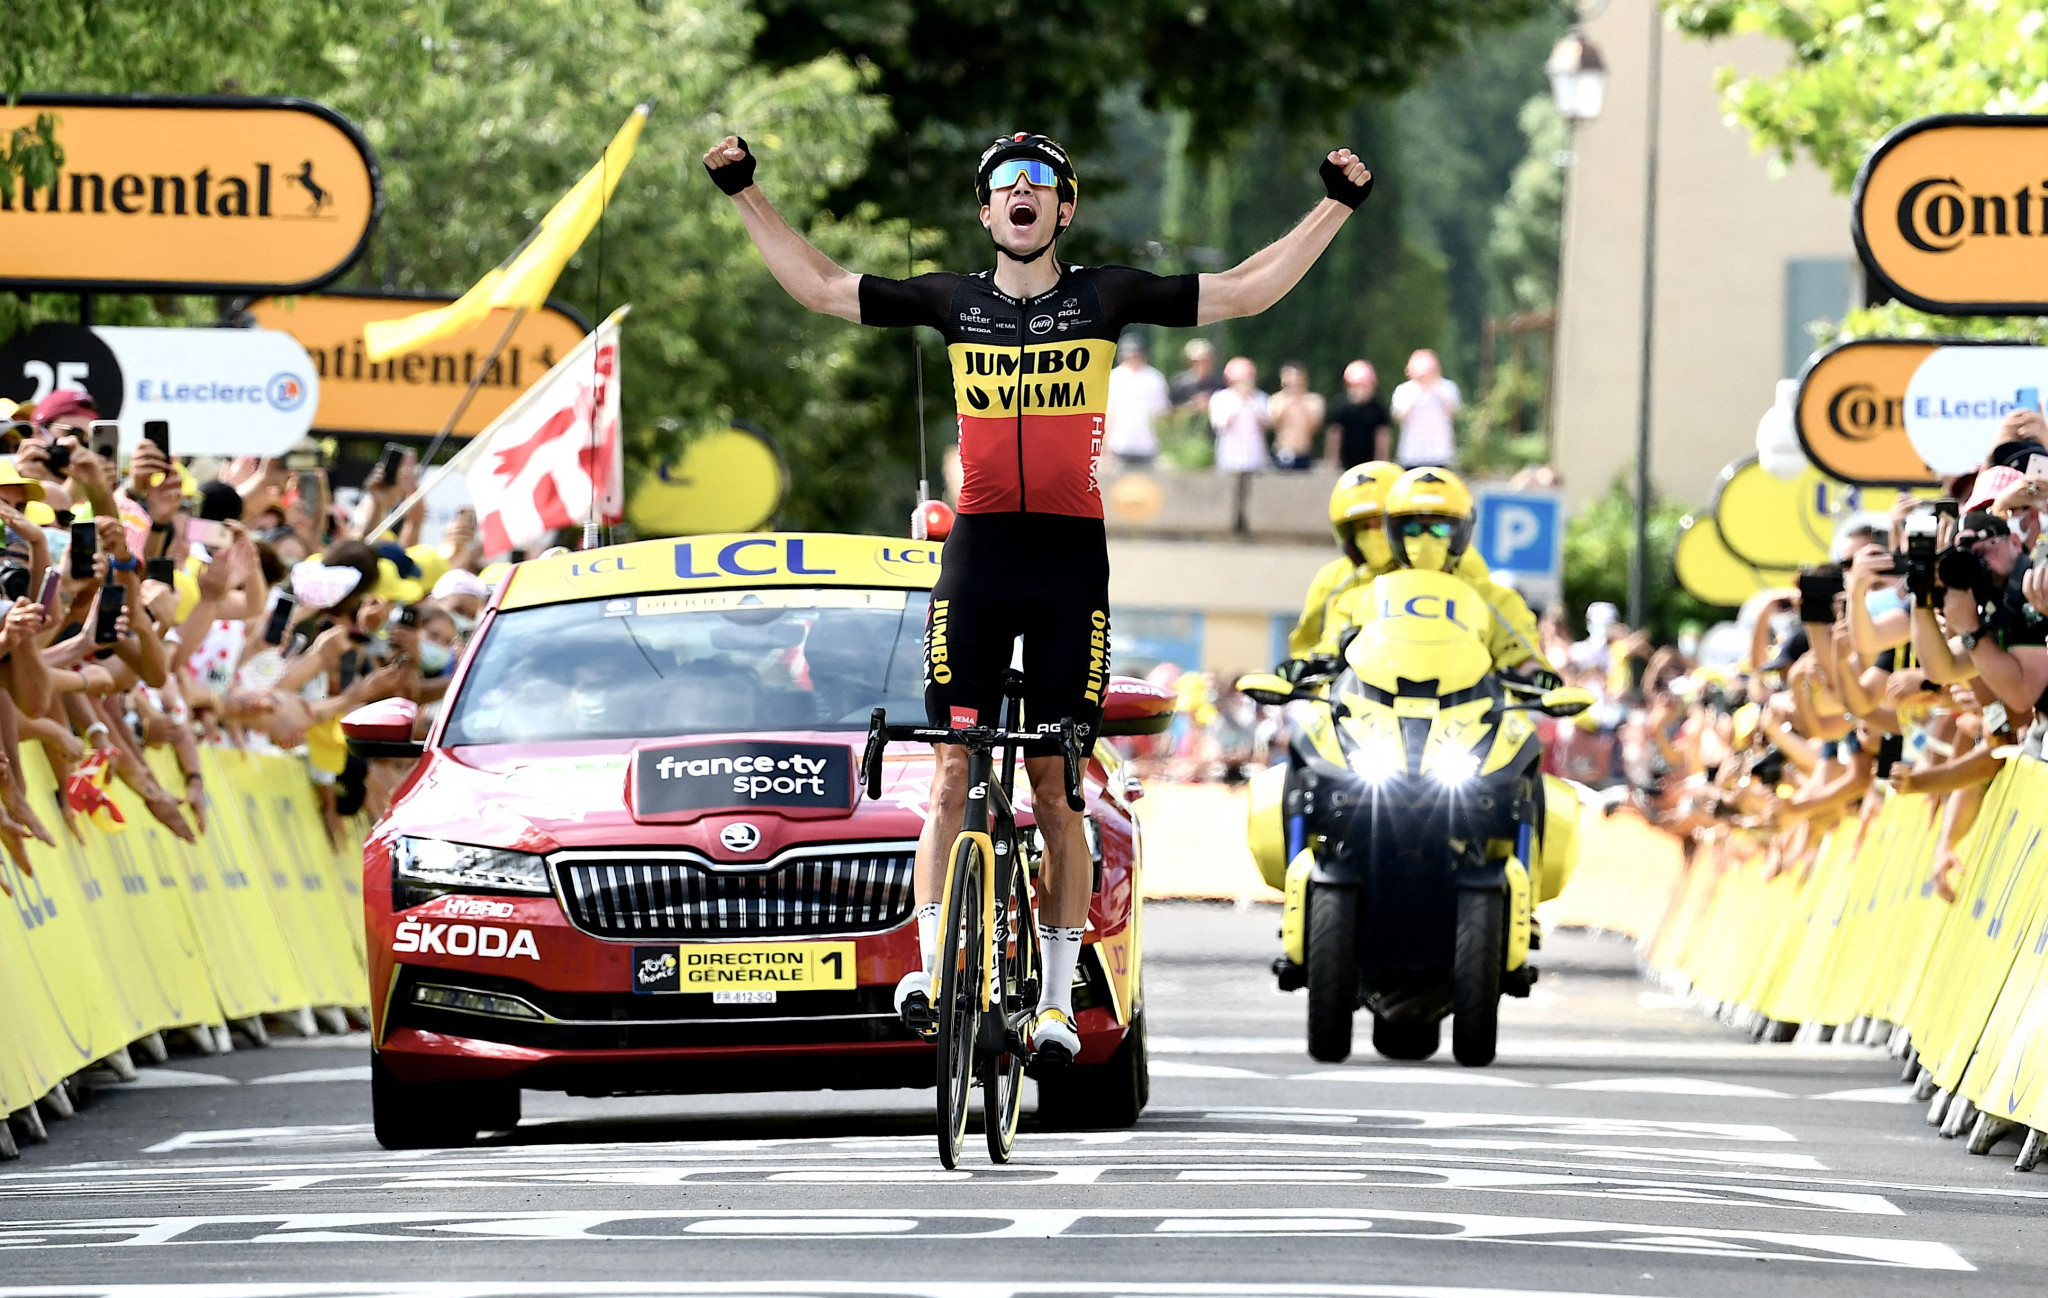 Van Aert makes brave attack to win stage 11 of Tour de France